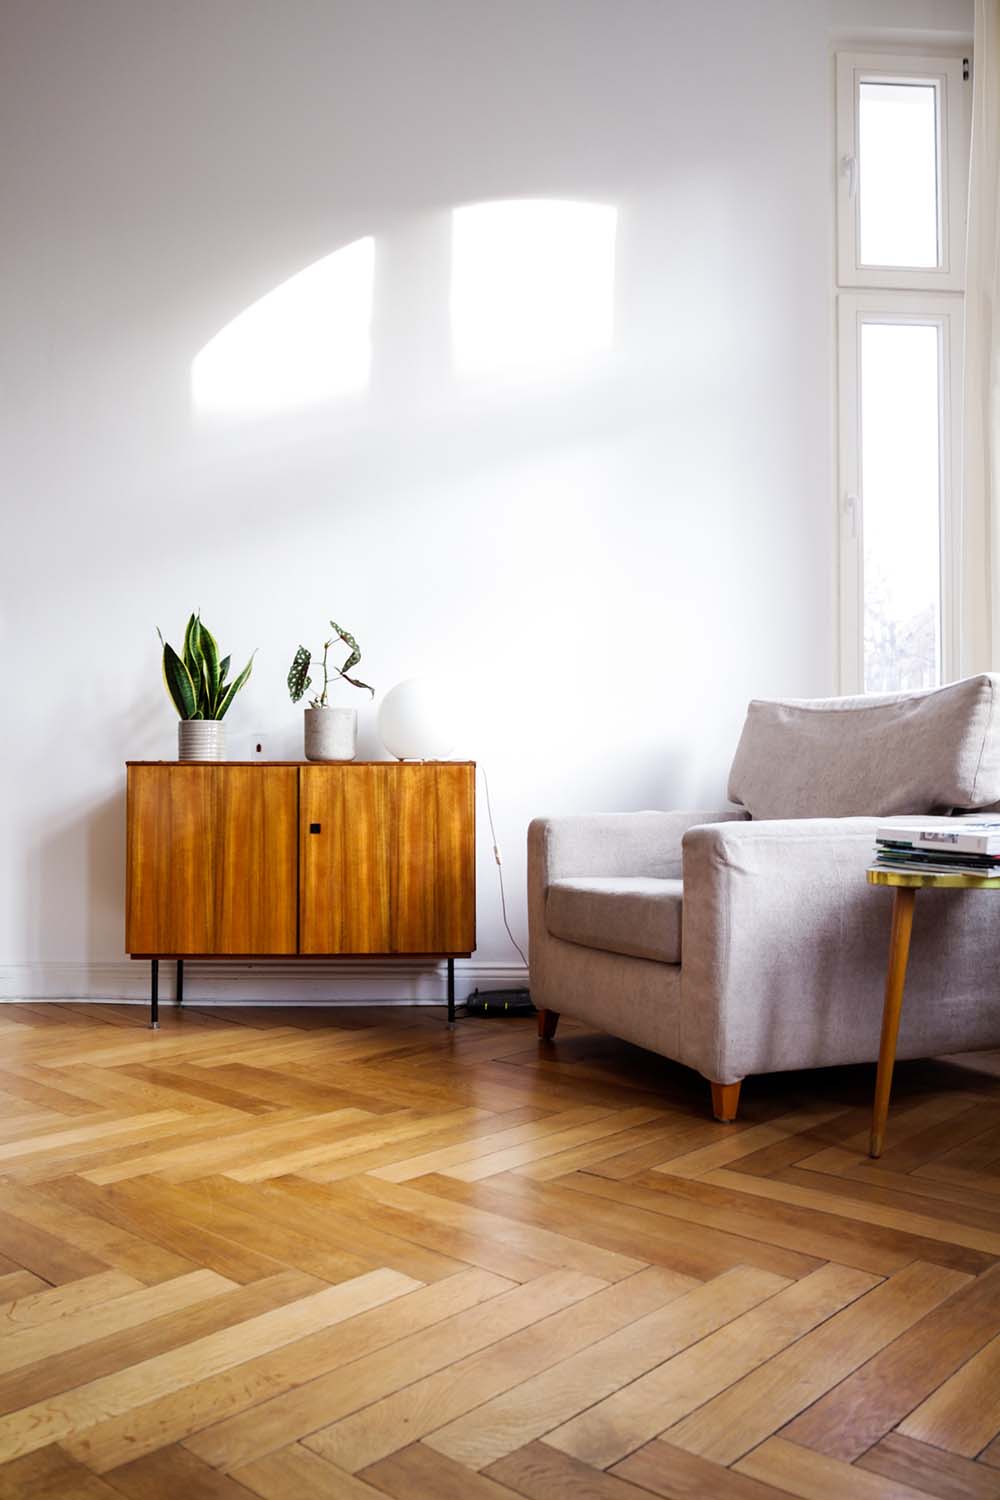 A pale wooden floor with planks arranged in a herringbone design, with an armchair and a sideboard on top. 